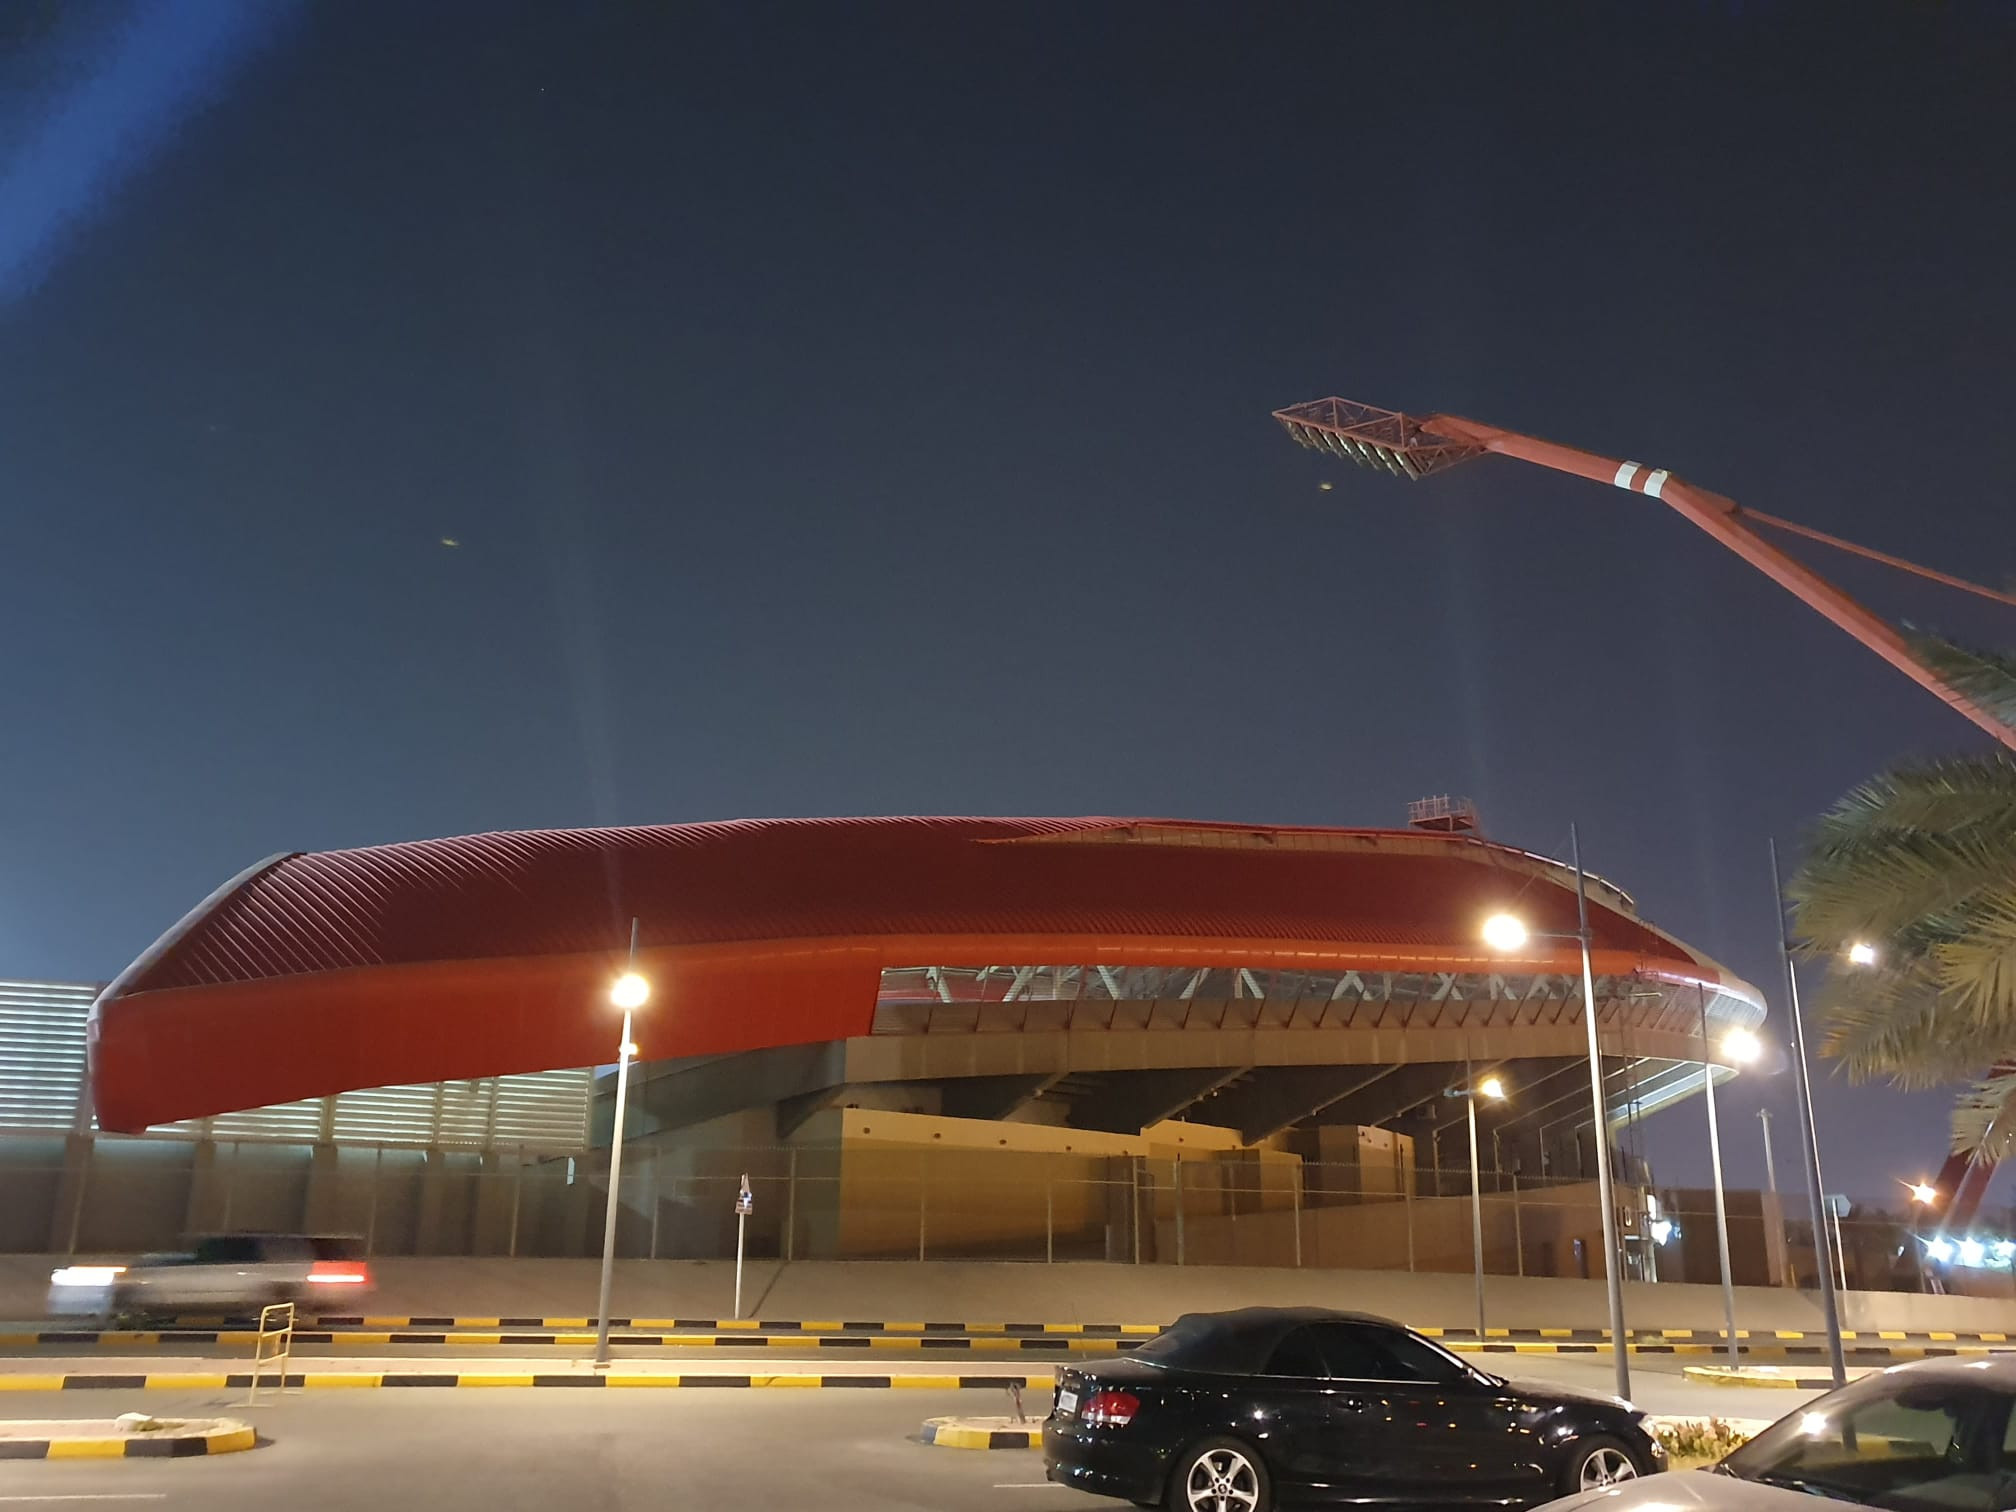 The event took place at Isa Sports City, in the shadow of Bahrain National Stadium ©ITG